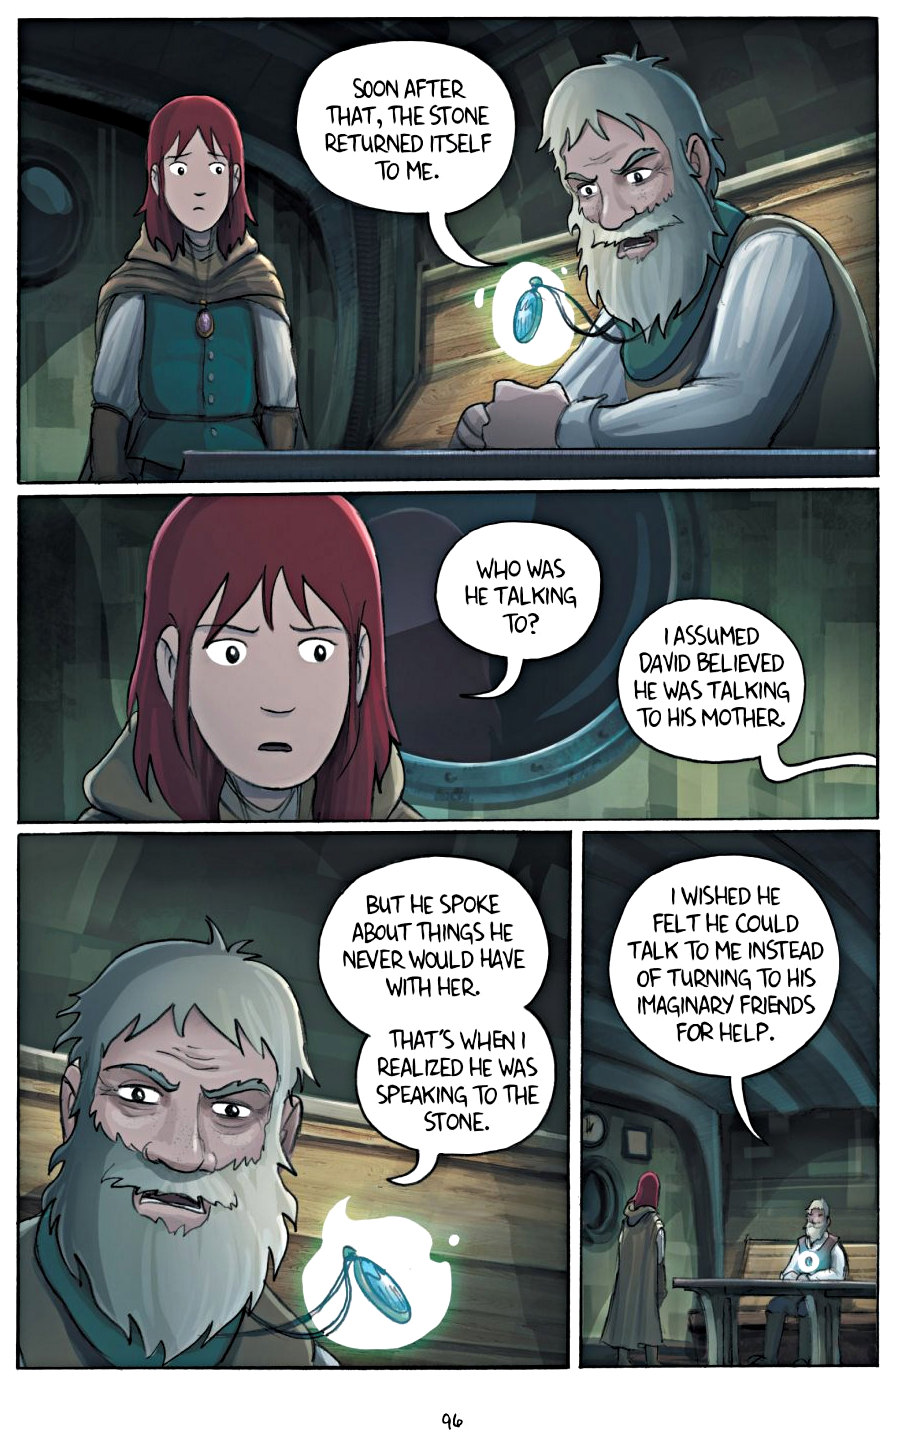 page 96 of amulet 5 prince of the elves graphic novel